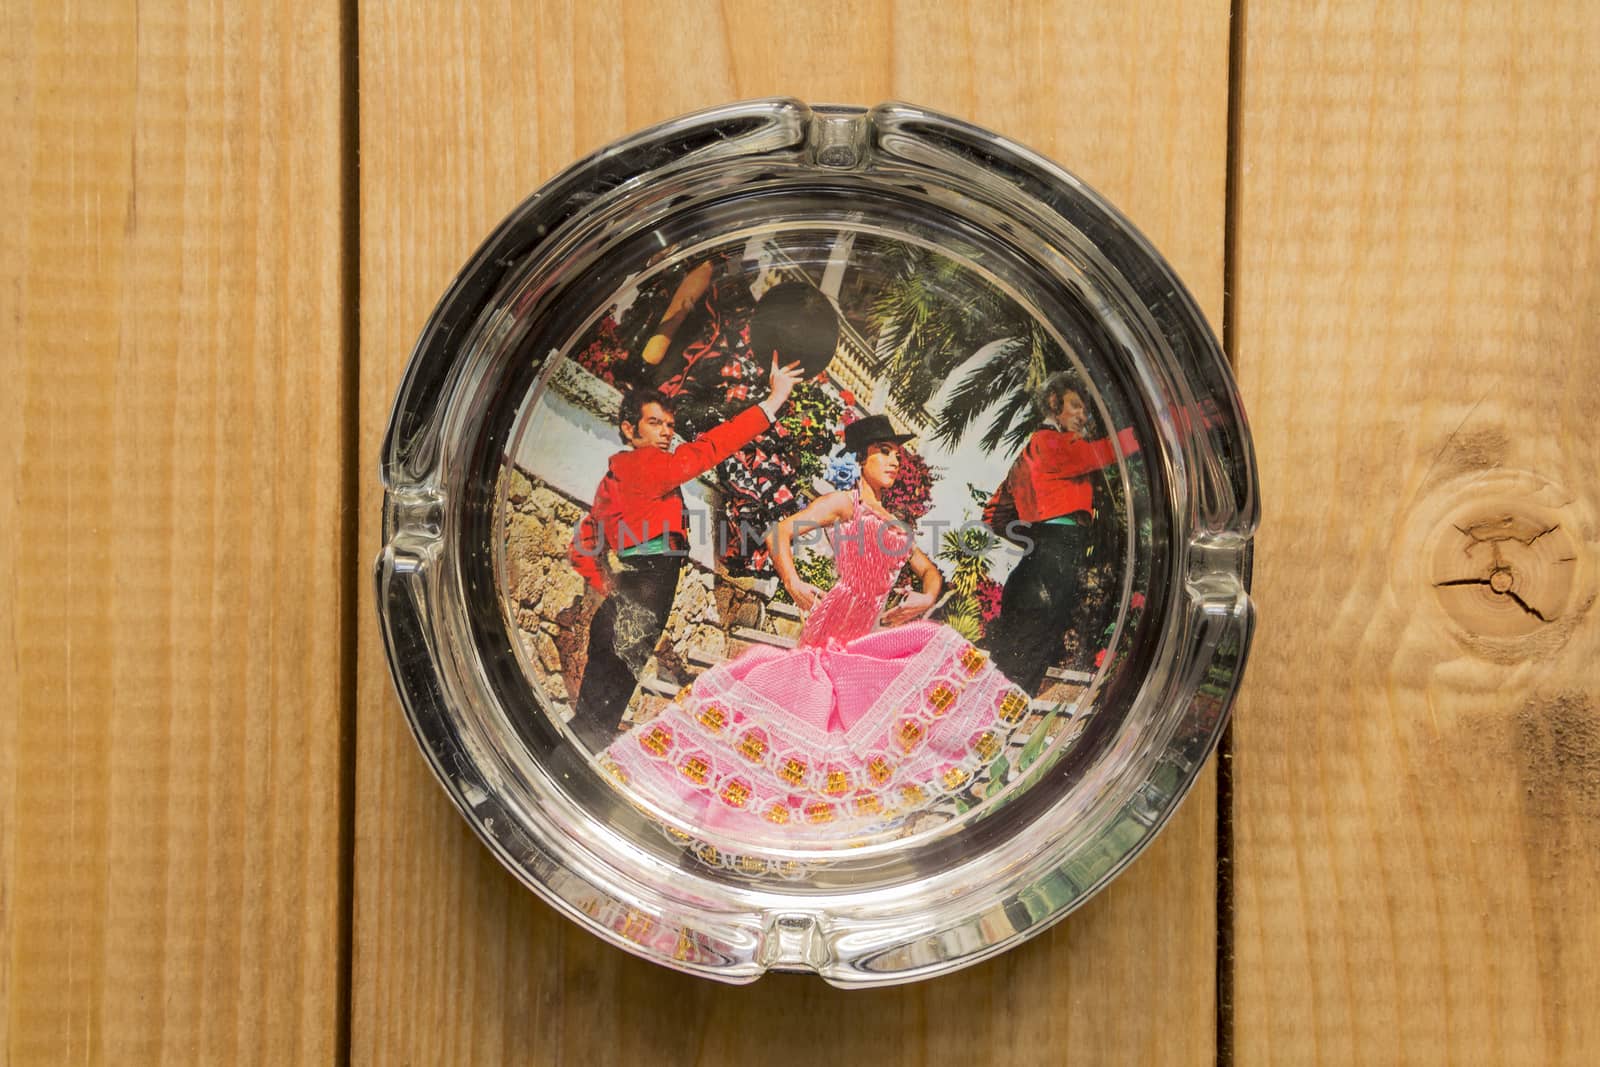 picture of Spanish dance in a glass ashtray by sergeizubkov64